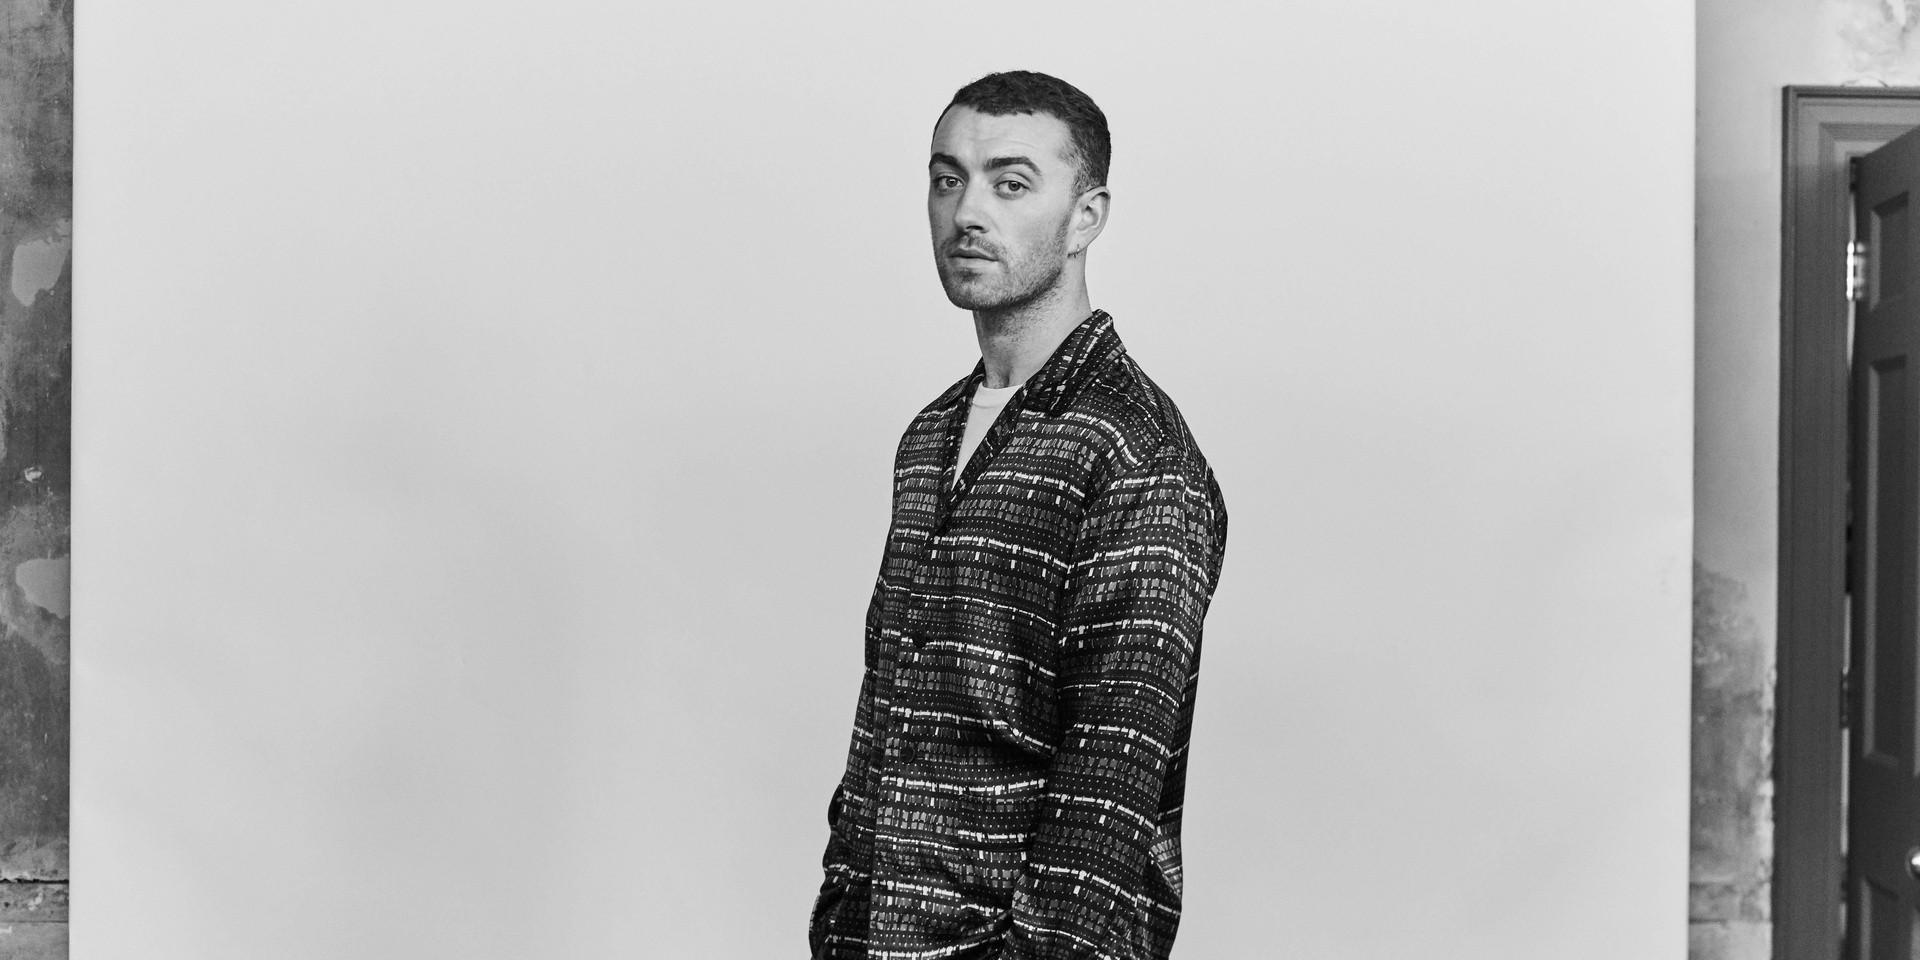 Ticketing details for Sam Smith's show in Singapore announced